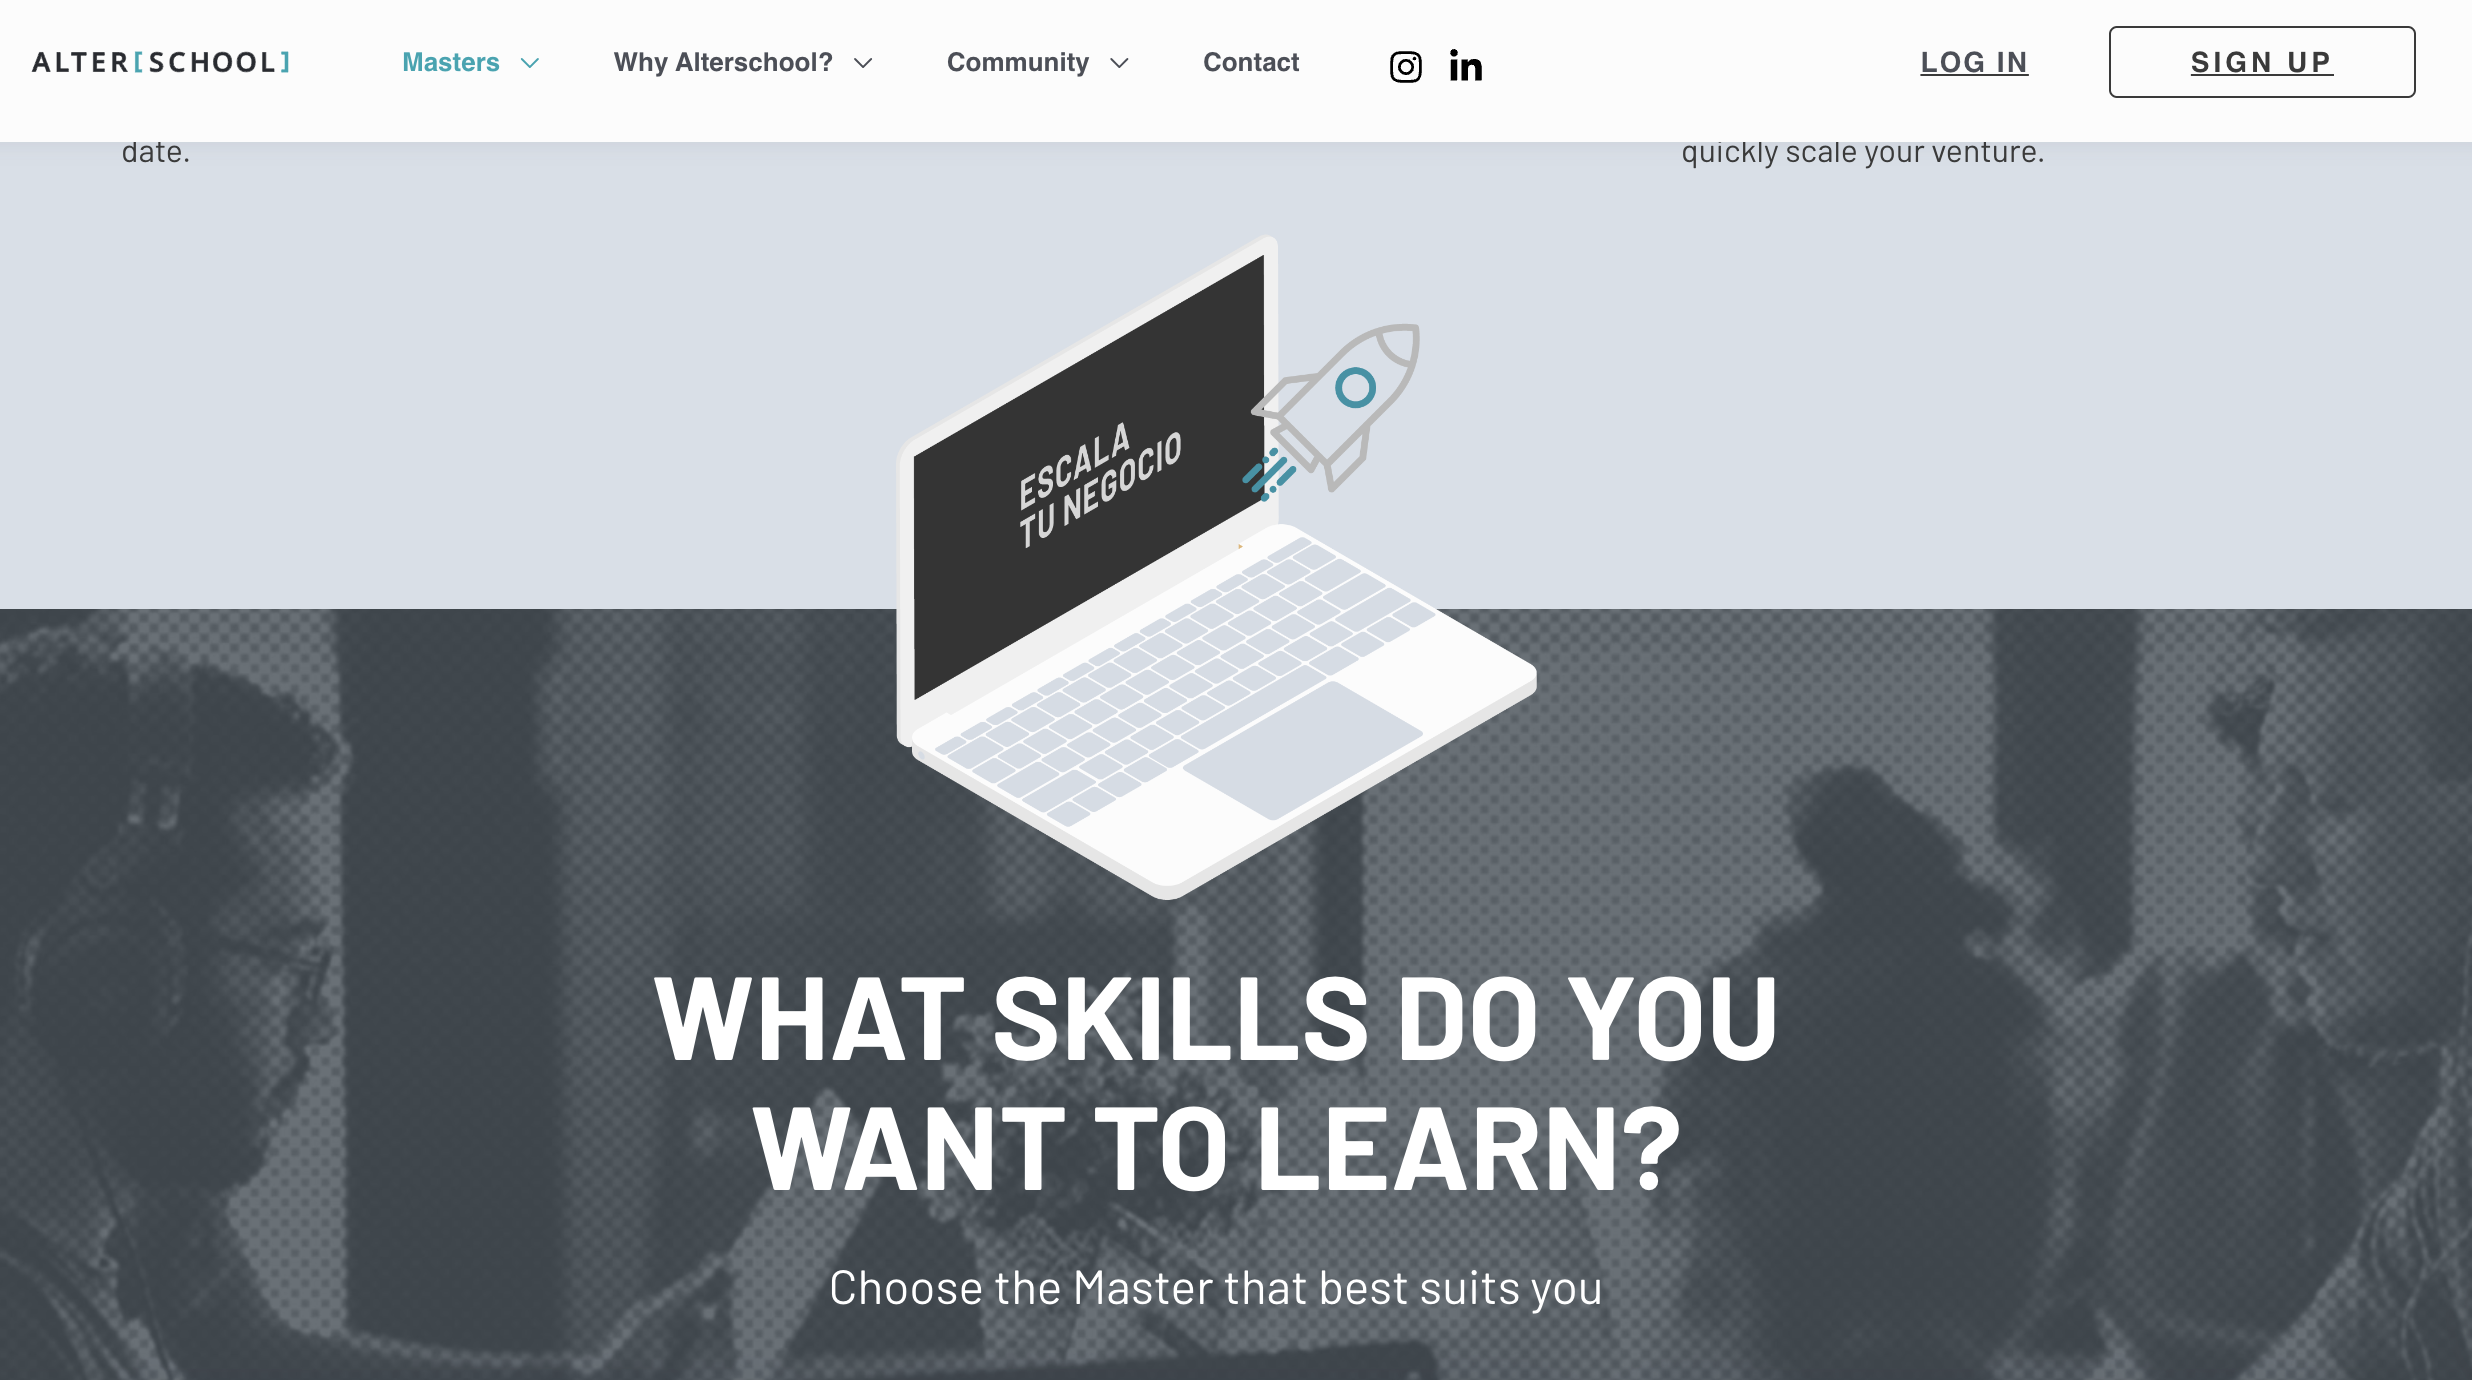 Alterschools master program for property managers